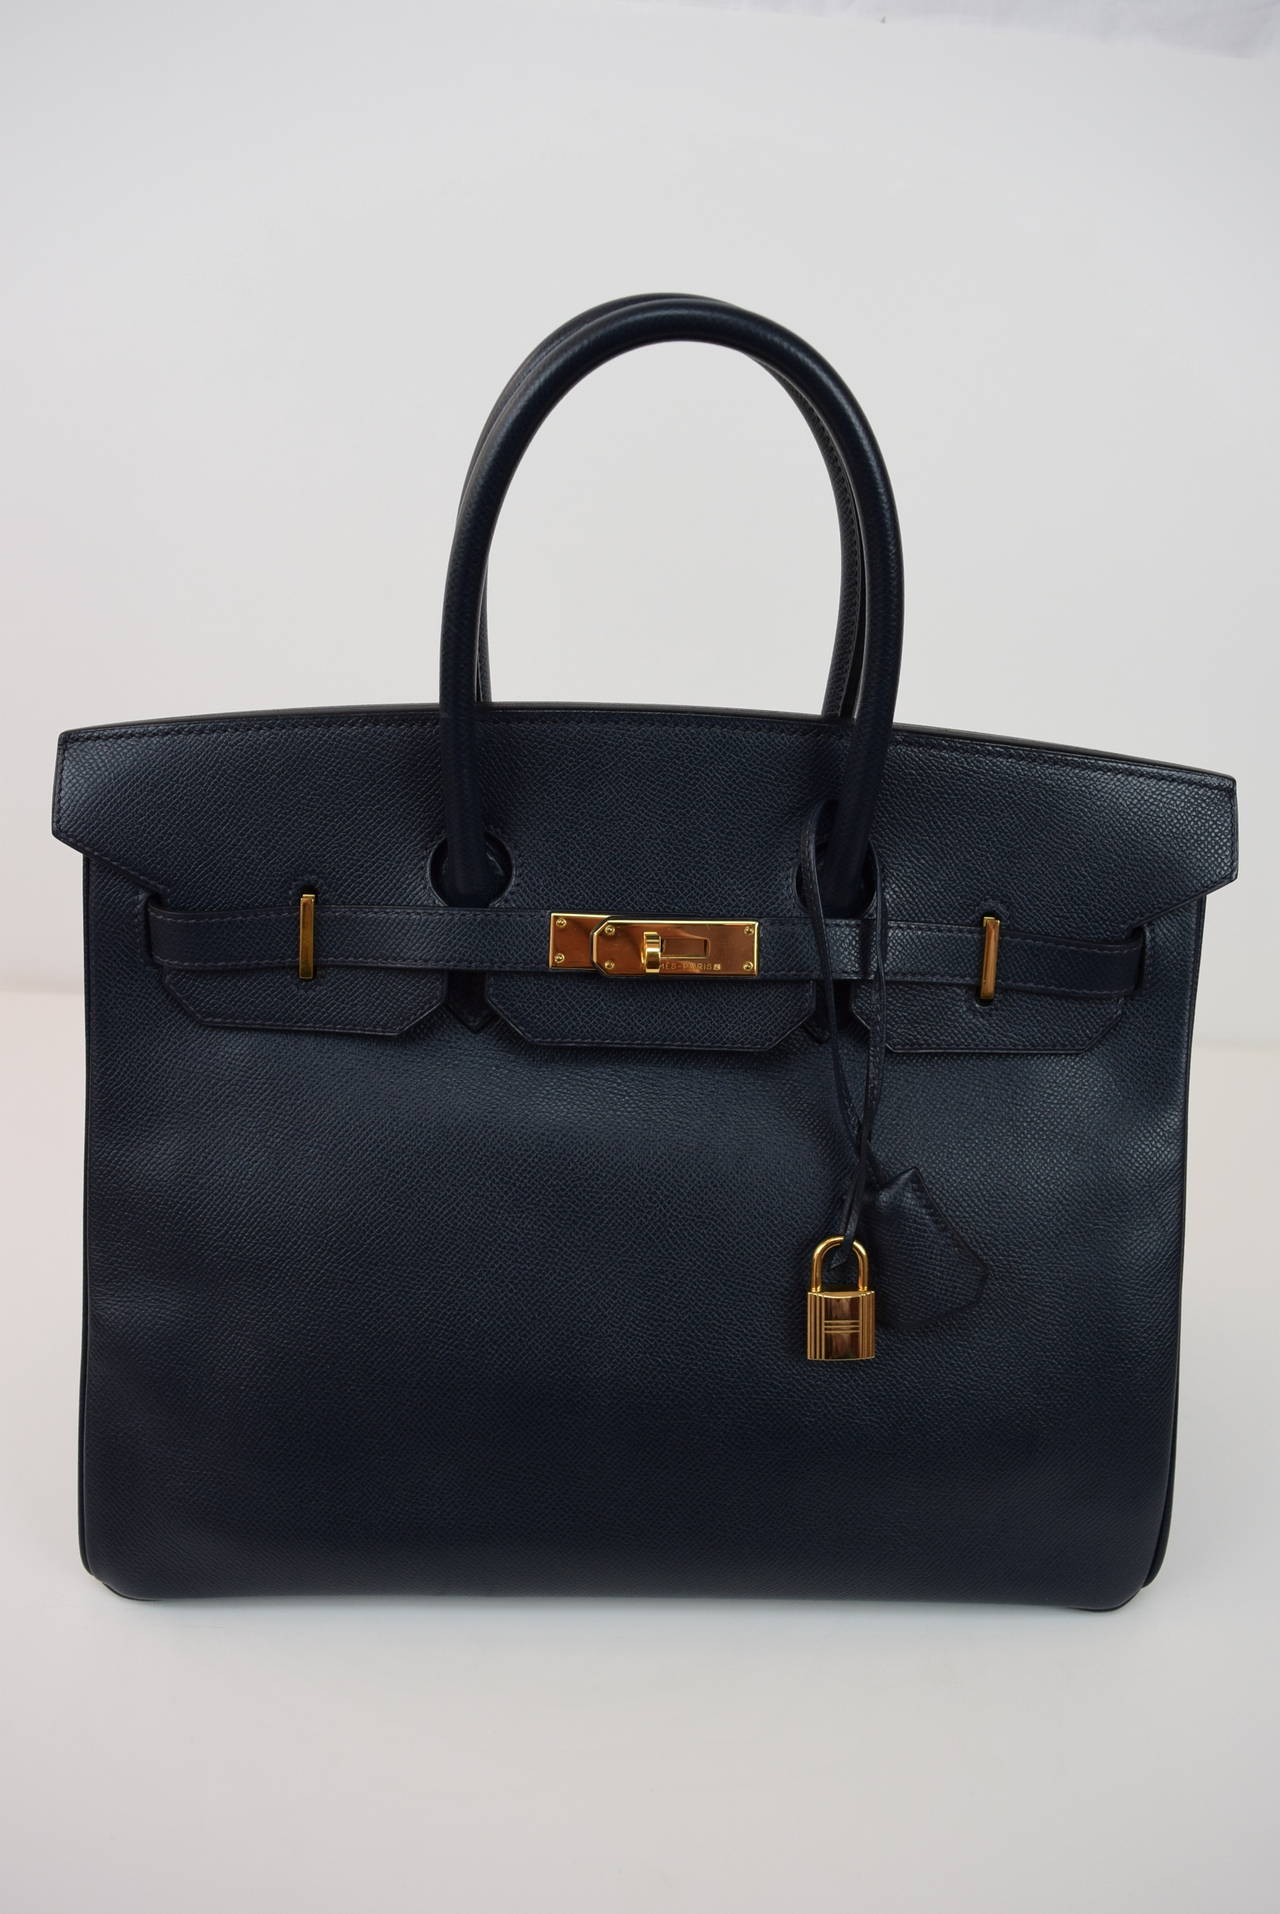 Hermes Dark Navy Blue Birkin 35 cm Bag :Circa :1999
C Square Year with Hermes Dust Cover .Excellent condition.
Some small scruff marks on Two of the corners evident in one of the photos otherwise this bag is in Excellent condition .No scratches on